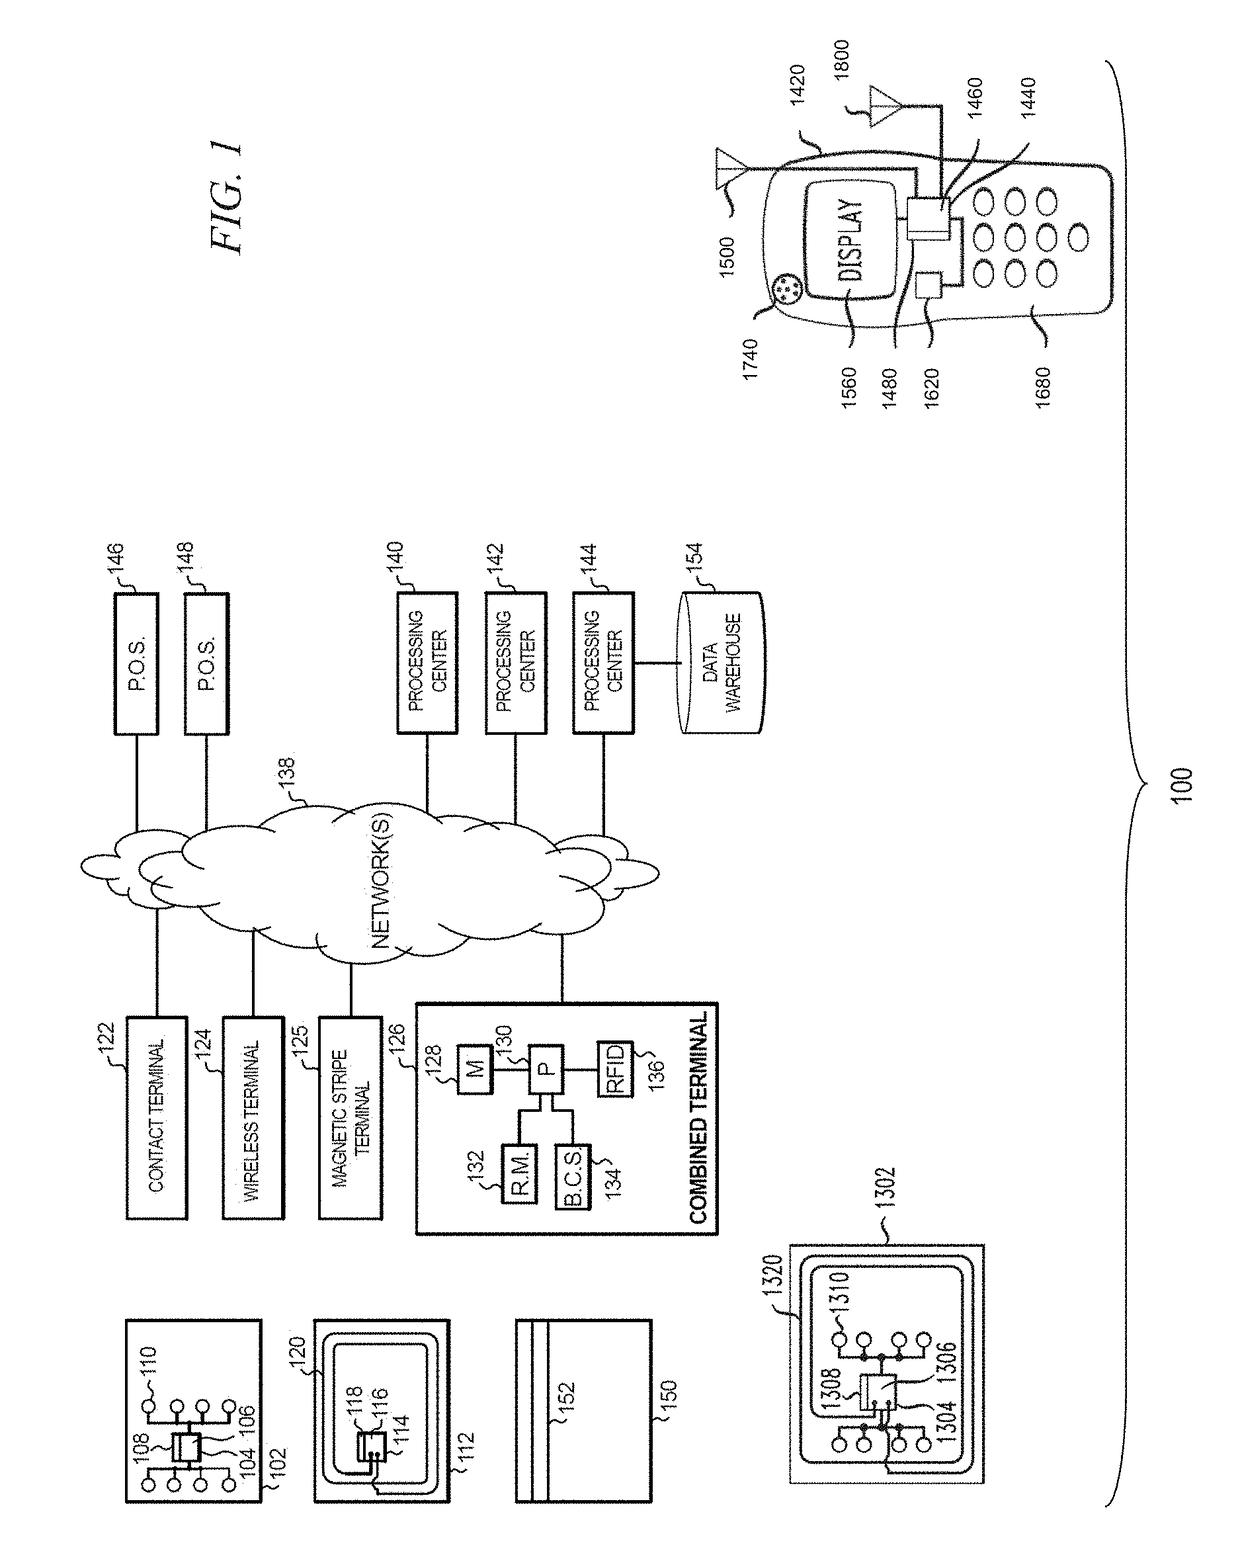 Apparatus and method for dynamic offline balance management for preauthorized smart cards